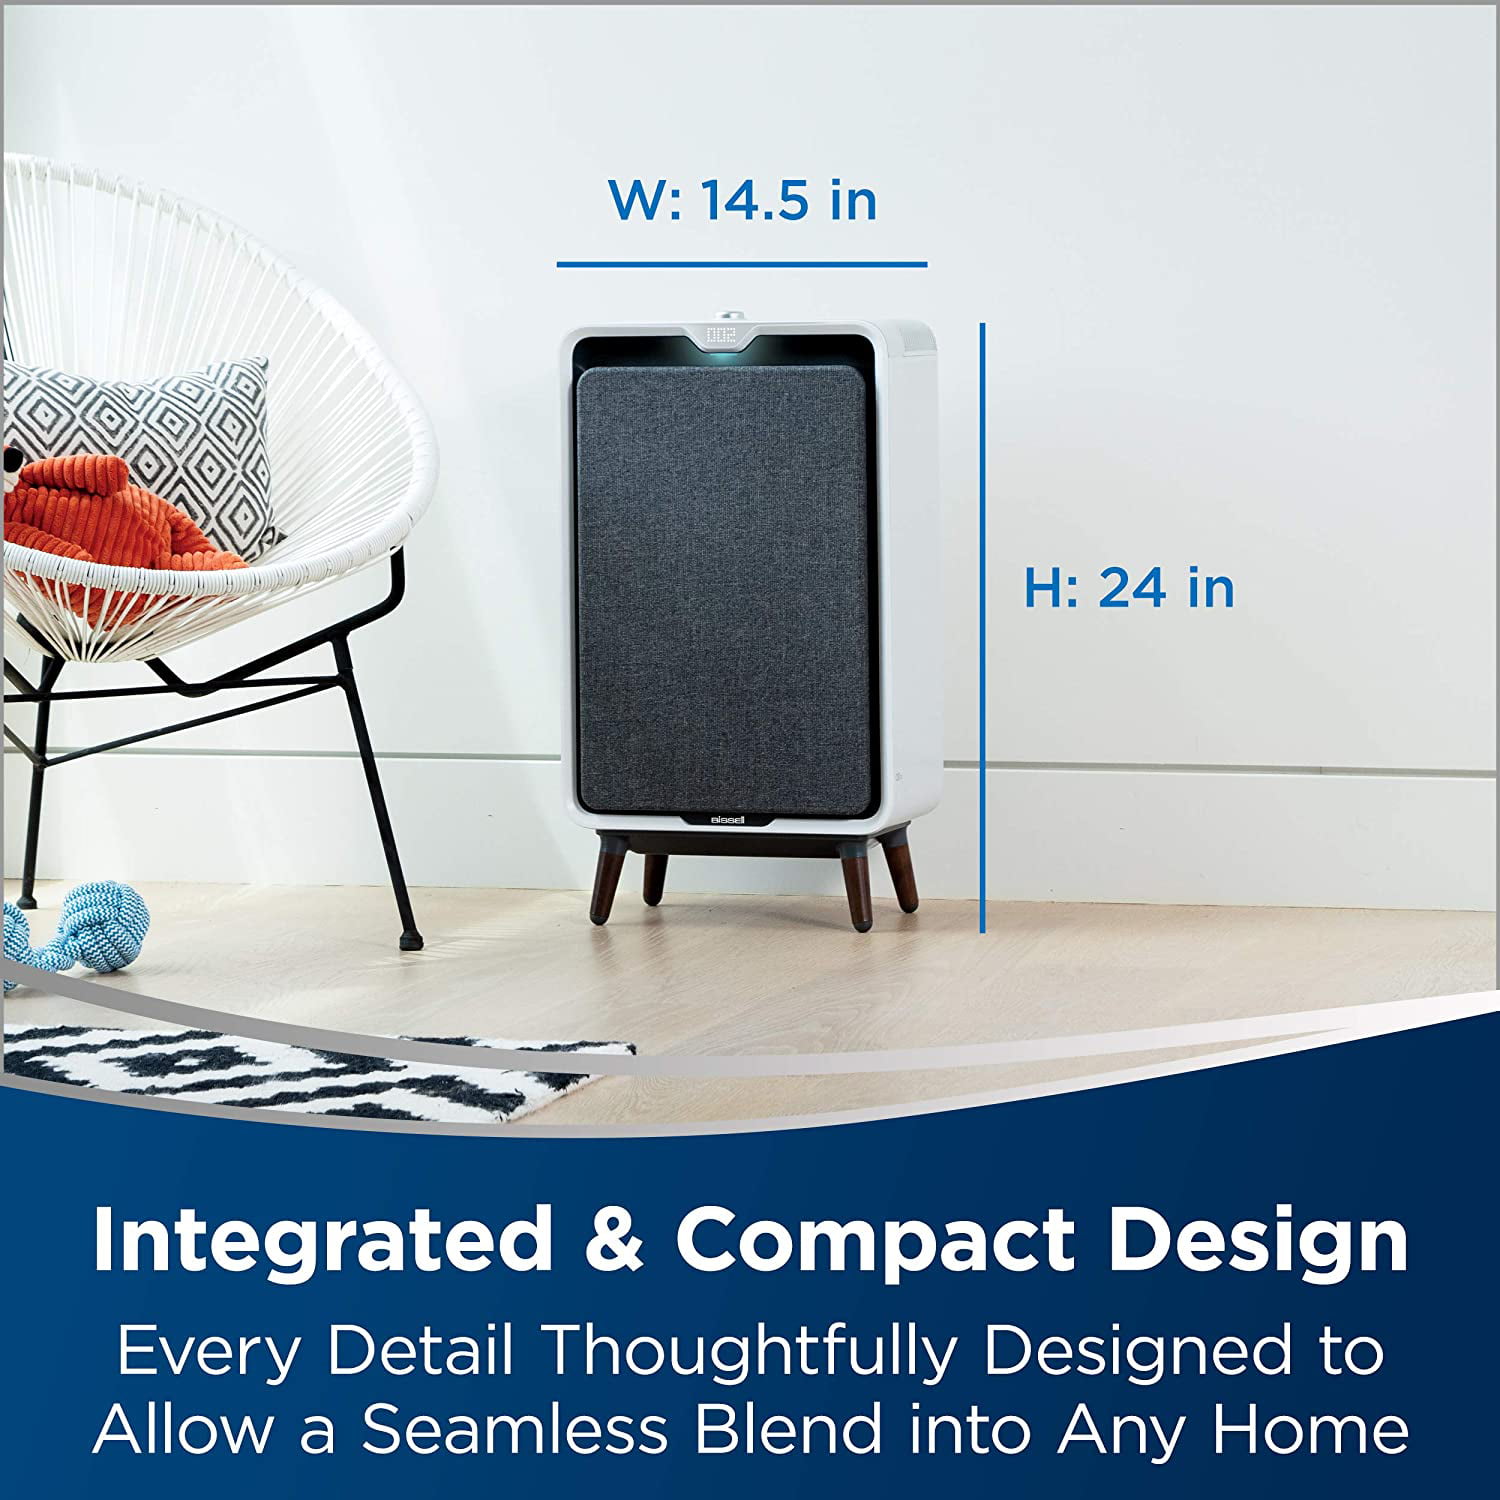 Real time air quality display BISSELL Air Purifier Dust HEPA Air320 Captures over 99% of 0.3 micron particles Allergies and Pet dander